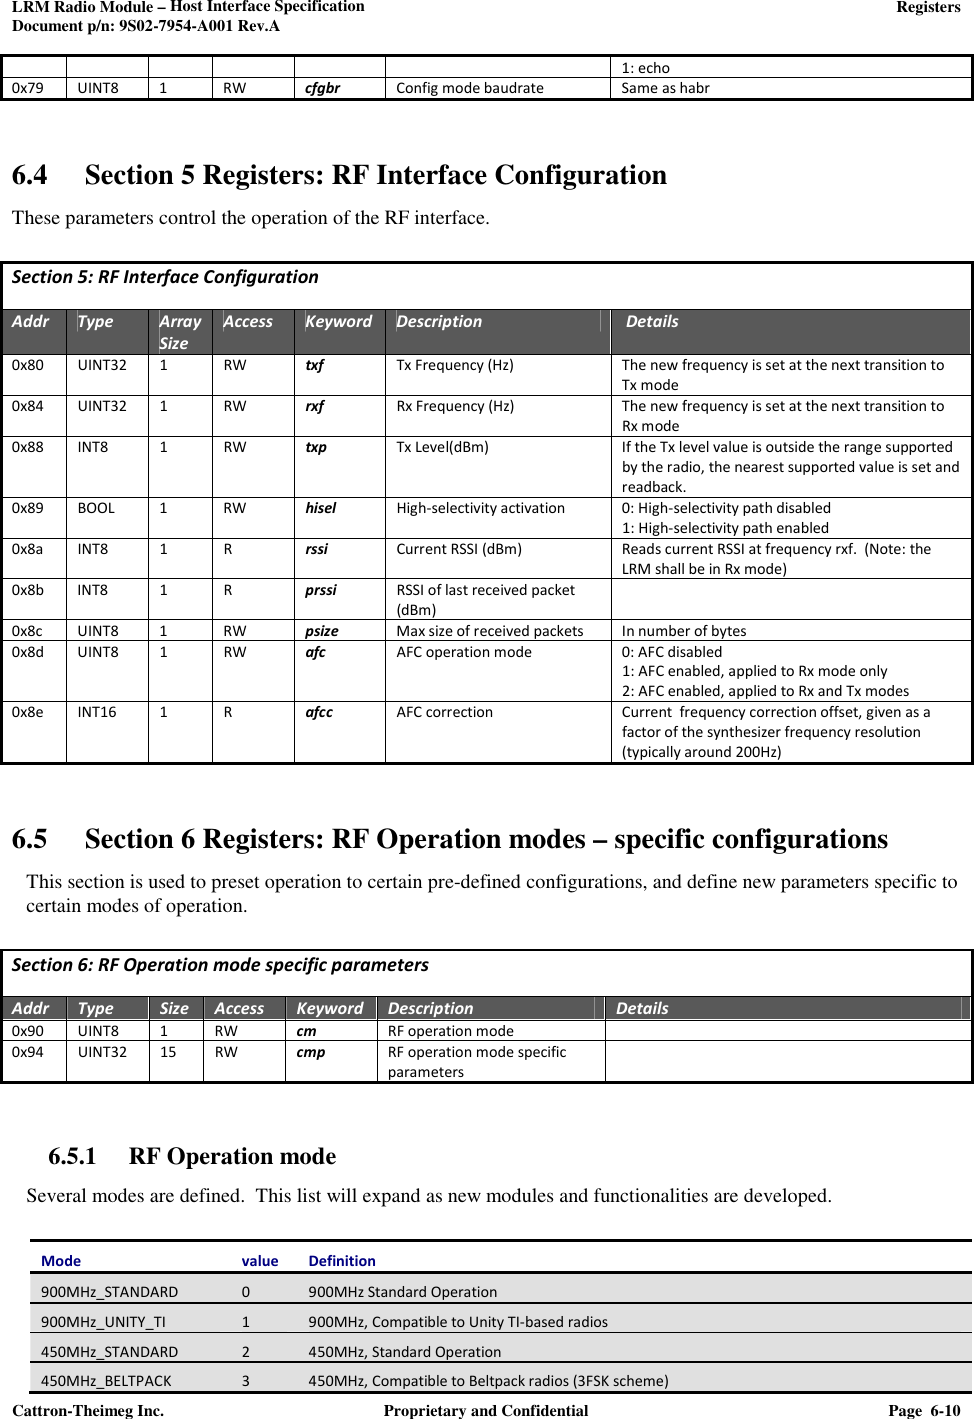 LRM Radio Module – Host Interface Specification     Registers  Document p/n: 9S02-7954-A001 Rev.A  Cattron-Theimeg Inc.  Proprietary and Confidential  Page  6-10  1: echo 0x79  UINT8  1   RW  cfgbr  Config mode baudrate  Same as habr  6.4 Section 5 Registers: RF Interface Configuration These parameters control the operation of the RF interface.  Section 5: RF Interface Configuration  Addr Type Array Size Access Keyword Description  Details 0x80  UINT32  1  RW  txf  Tx Frequency (Hz)  The new frequency is set at the next transition to Tx mode 0x84  UINT32  1  RW  rxf  Rx Frequency (Hz)  The new frequency is set at the next transition to Rx mode 0x88  INT8  1  RW  txp  Tx Level(dBm)  If the Tx level value is outside the range supported by the radio, the nearest supported value is set and readback. 0x89  BOOL  1  RW  hisel  High-selectivity activation  0: High-selectivity path disabled  1: High-selectivity path enabled  0x8a  INT8  1  R  rssi  Current RSSI (dBm)  Reads current RSSI at frequency rxf.  (Note: the LRM shall be in Rx mode) 0x8b  INT8  1  R  prssi  RSSI of last received packet (dBm)  0x8c UINT8 1 RW psize Max size of received packets In number of bytes 0x8d  UINT8  1  RW  afc  AFC operation mode  0: AFC disabled  1: AFC enabled, applied to Rx mode only 2: AFC enabled, applied to Rx and Tx modes 0x8e  INT16  1  R  afcc  AFC correction  Current  frequency correction offset, given as a factor of the synthesizer frequency resolution (typically around 200Hz)   6.5 Section 6 Registers: RF Operation modes – specific configurations This section is used to preset operation to certain pre-defined configurations, and define new parameters specific to certain modes of operation.  Section 6: RF Operation mode specific parameters  Addr Type Size Access Keyword Description Details 0x90 UINT8 1 RW cm RF operation mode  0x94  UINT32  15  RW  cmp  RF operation mode specific parameters   6.5.1 RF Operation mode  Several modes are defined.  This list will expand as new modules and functionalities are developed.   Mode value Definition 900MHz_STANDARD  0  900MHz Standard Operation   900MHz_UNITY_TI  1  900MHz, Compatible to Unity TI-based radios 450MHz_STANDARD 2 450MHz, Standard Operation 450MHz_BELTPACK 3 450MHz, Compatible to Beltpack radios (3FSK scheme) 